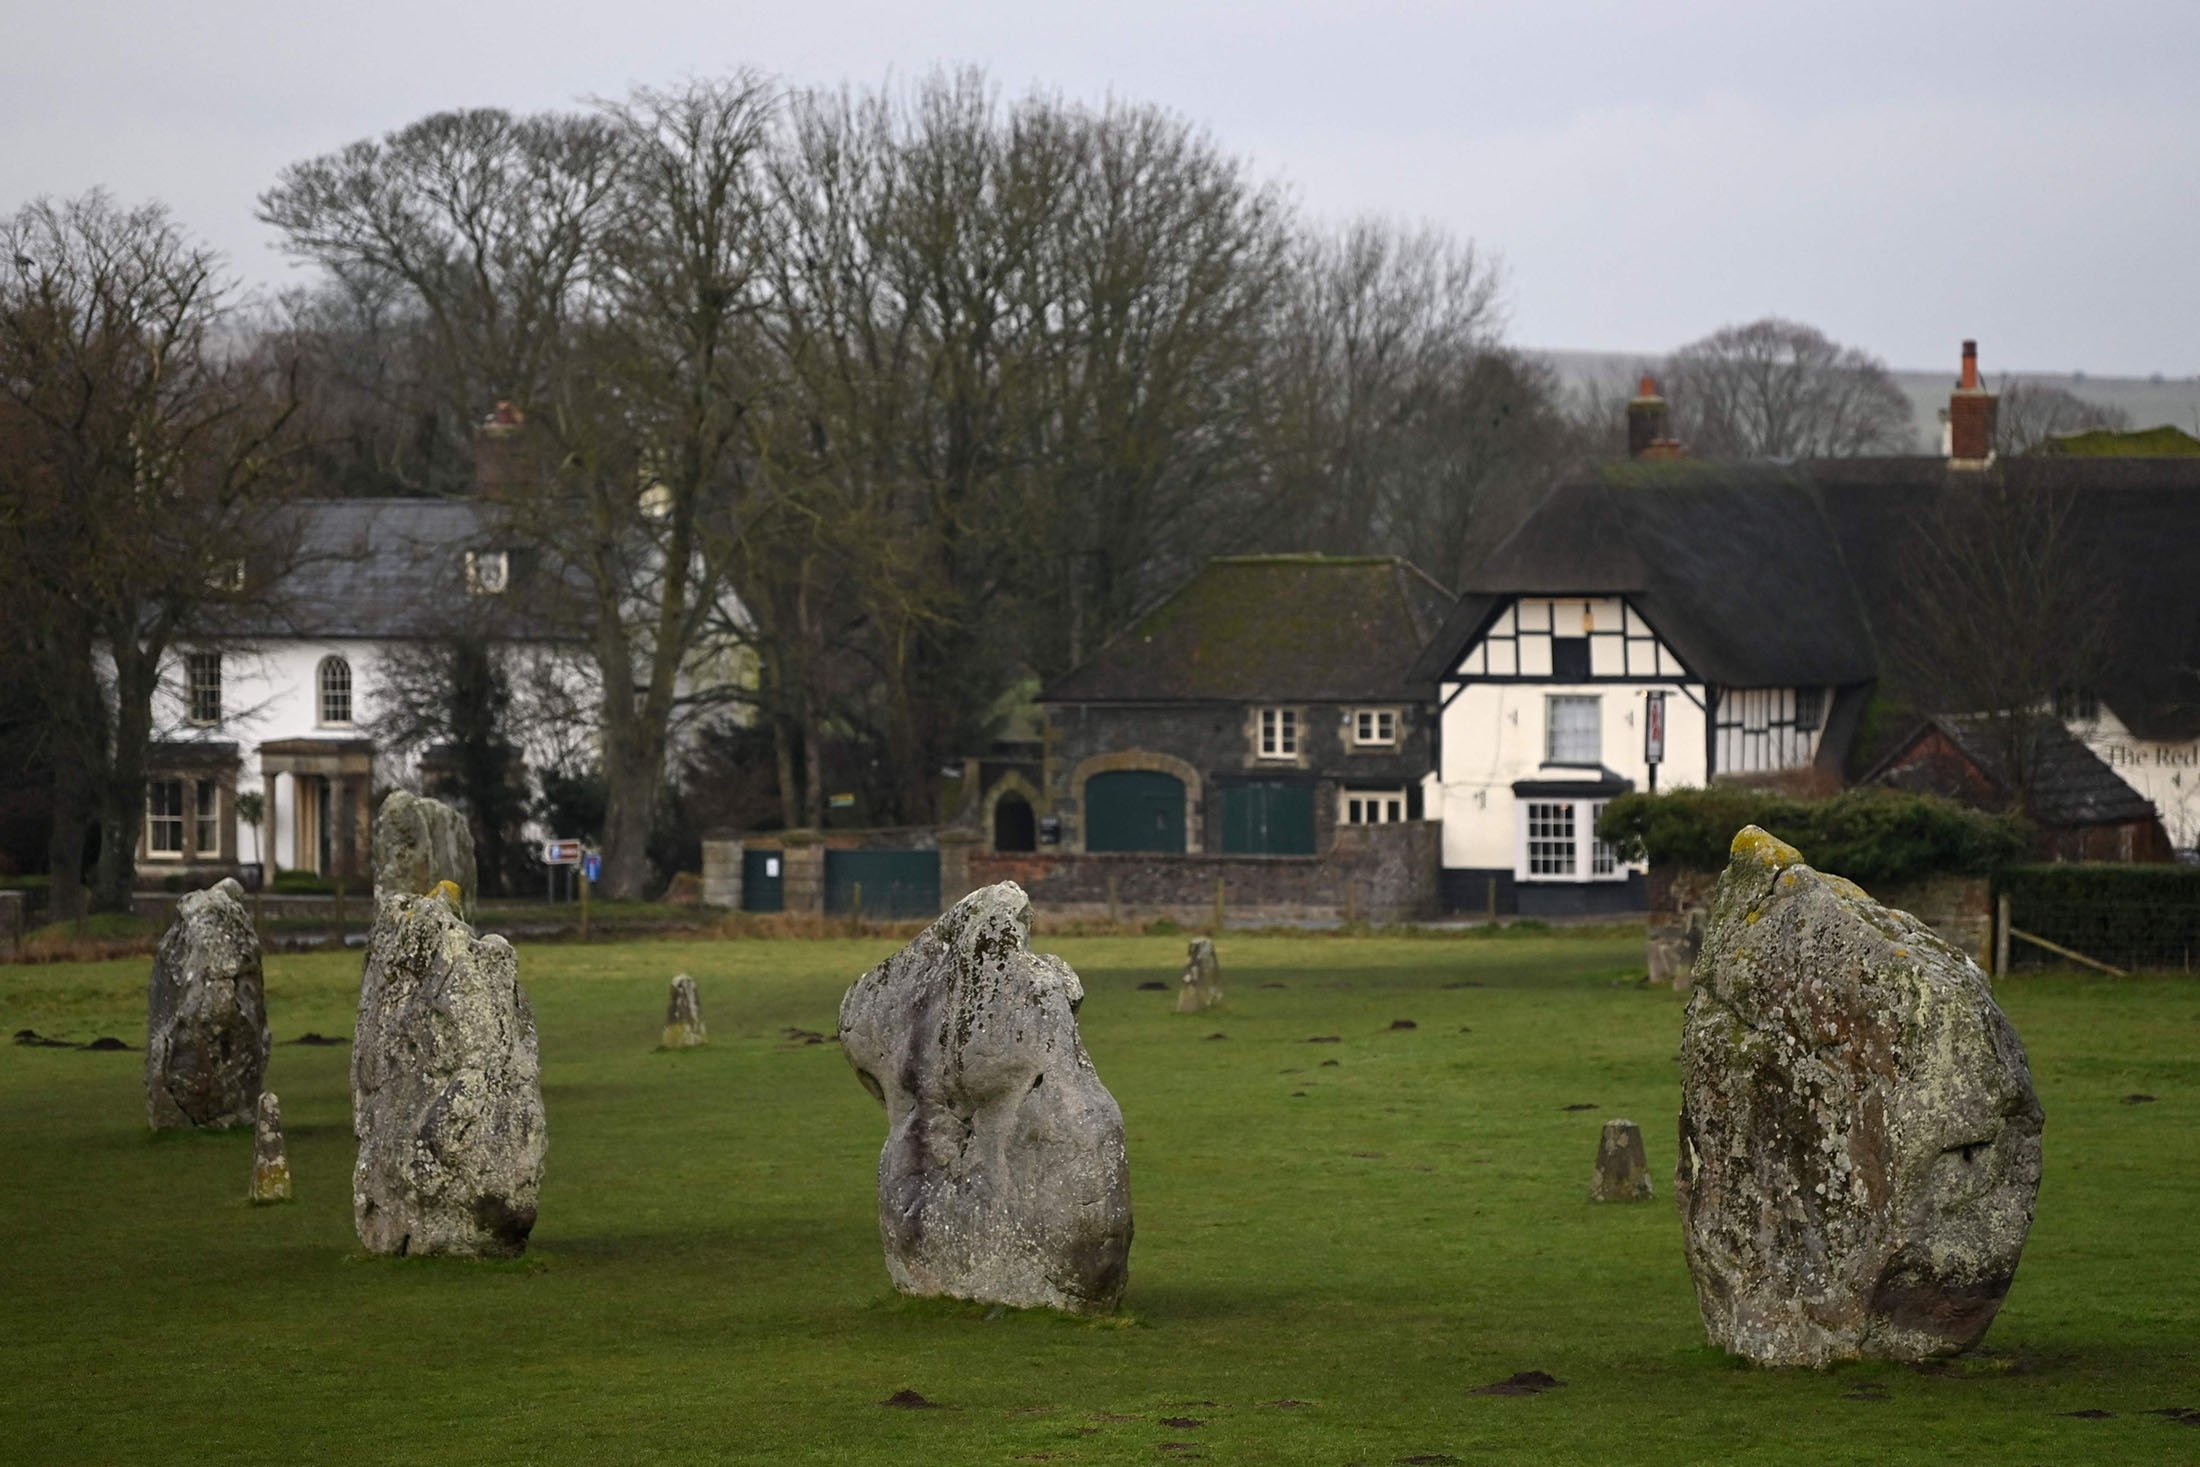 Stones that form part of the Stone Circle are pictured in Avebury, southern England, Jan. 19, 2022. (AFP Photo)